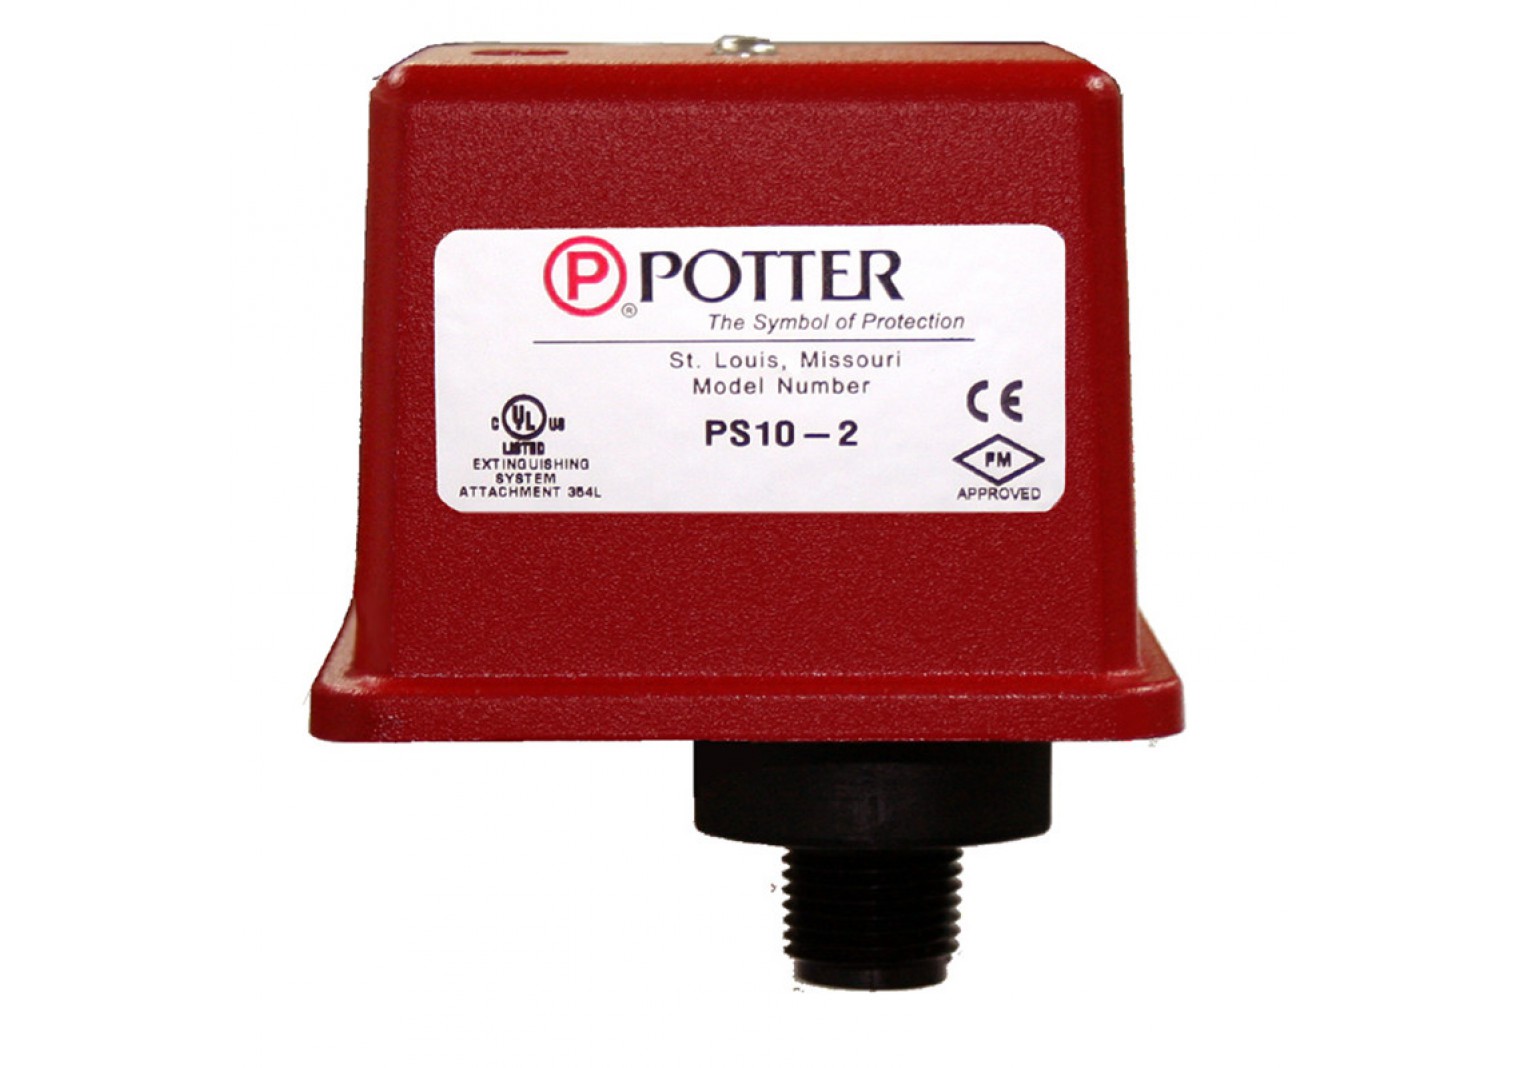 POTTER DPS10 Detected pressure switch